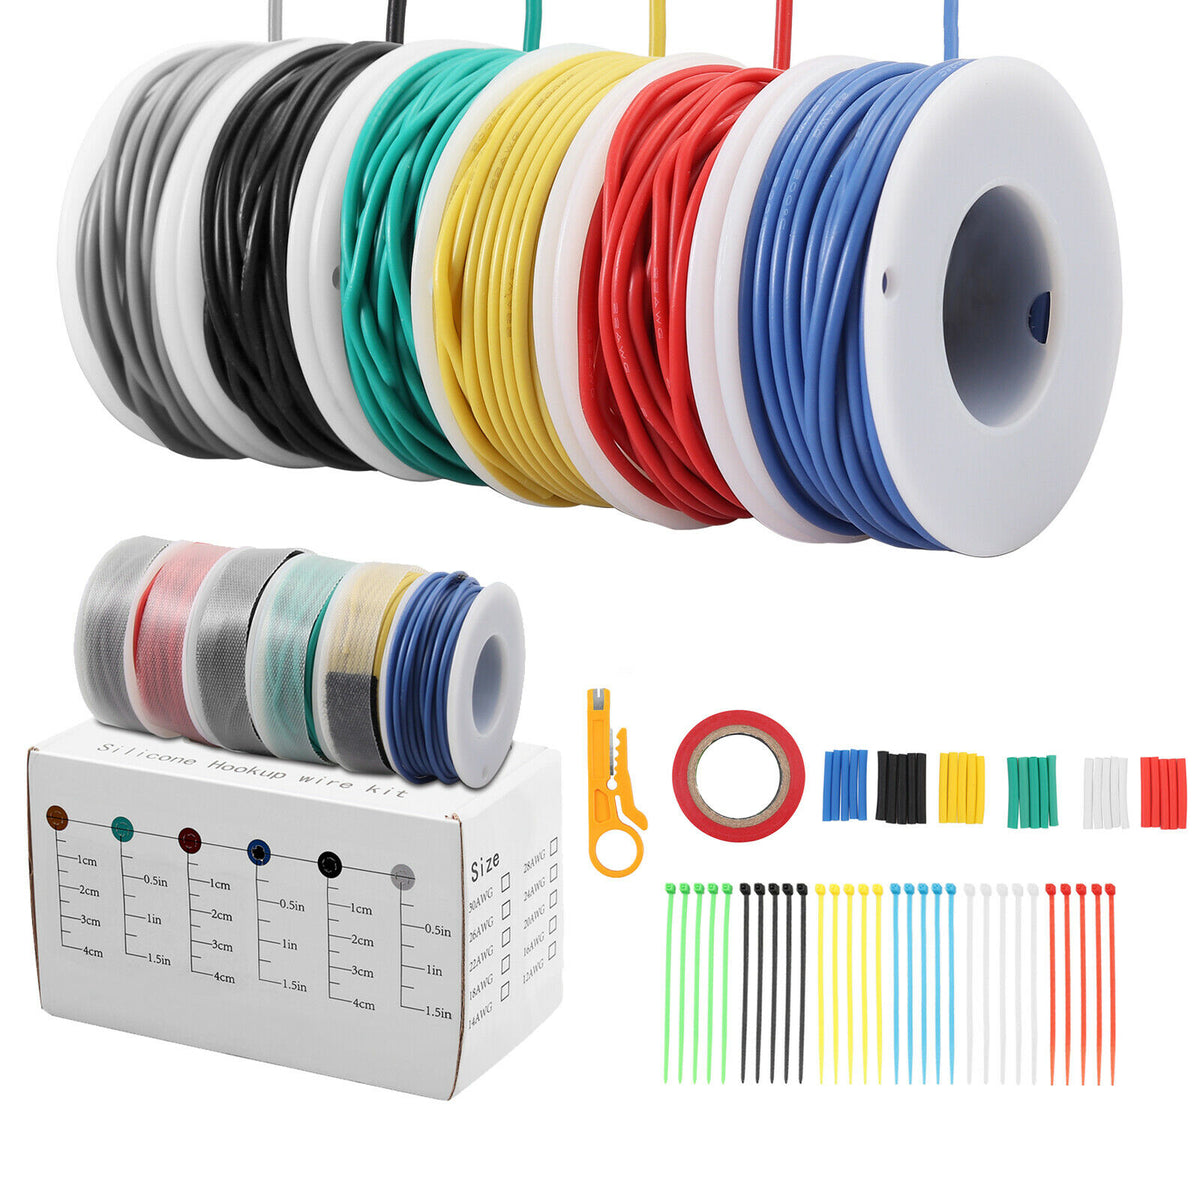 18AWG Hook Up Wire Kit Silicone Coated Wire 6 Color Spools Tinned Stranded  New